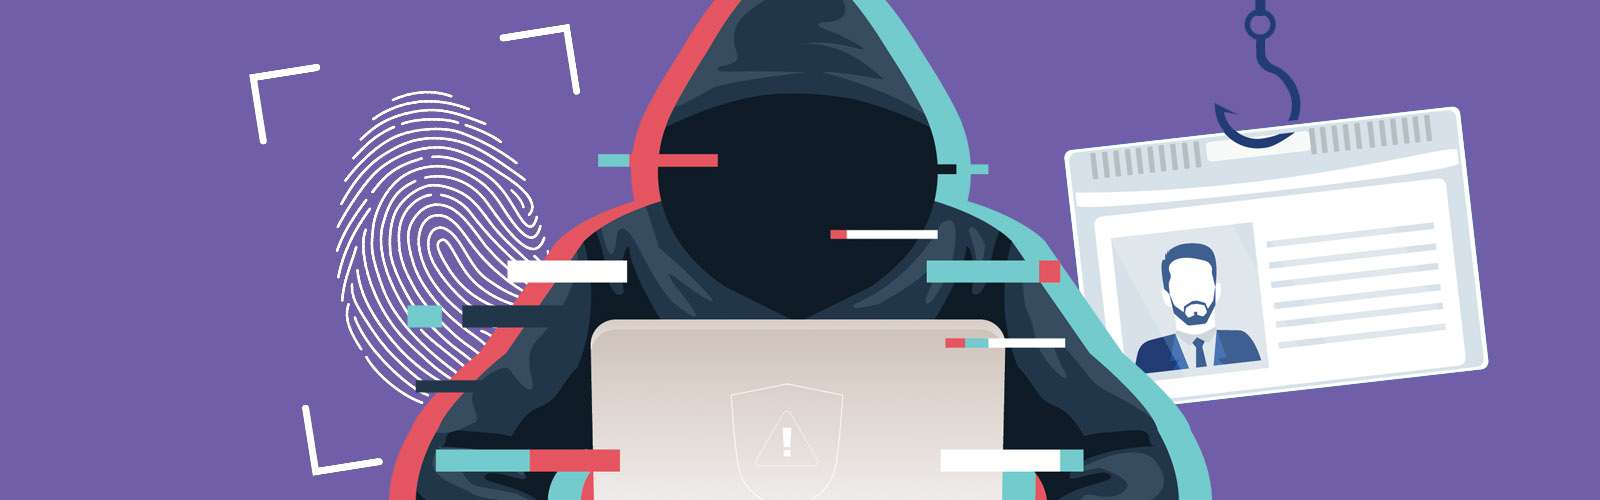 Hacker illustration and personal ID - protect your data